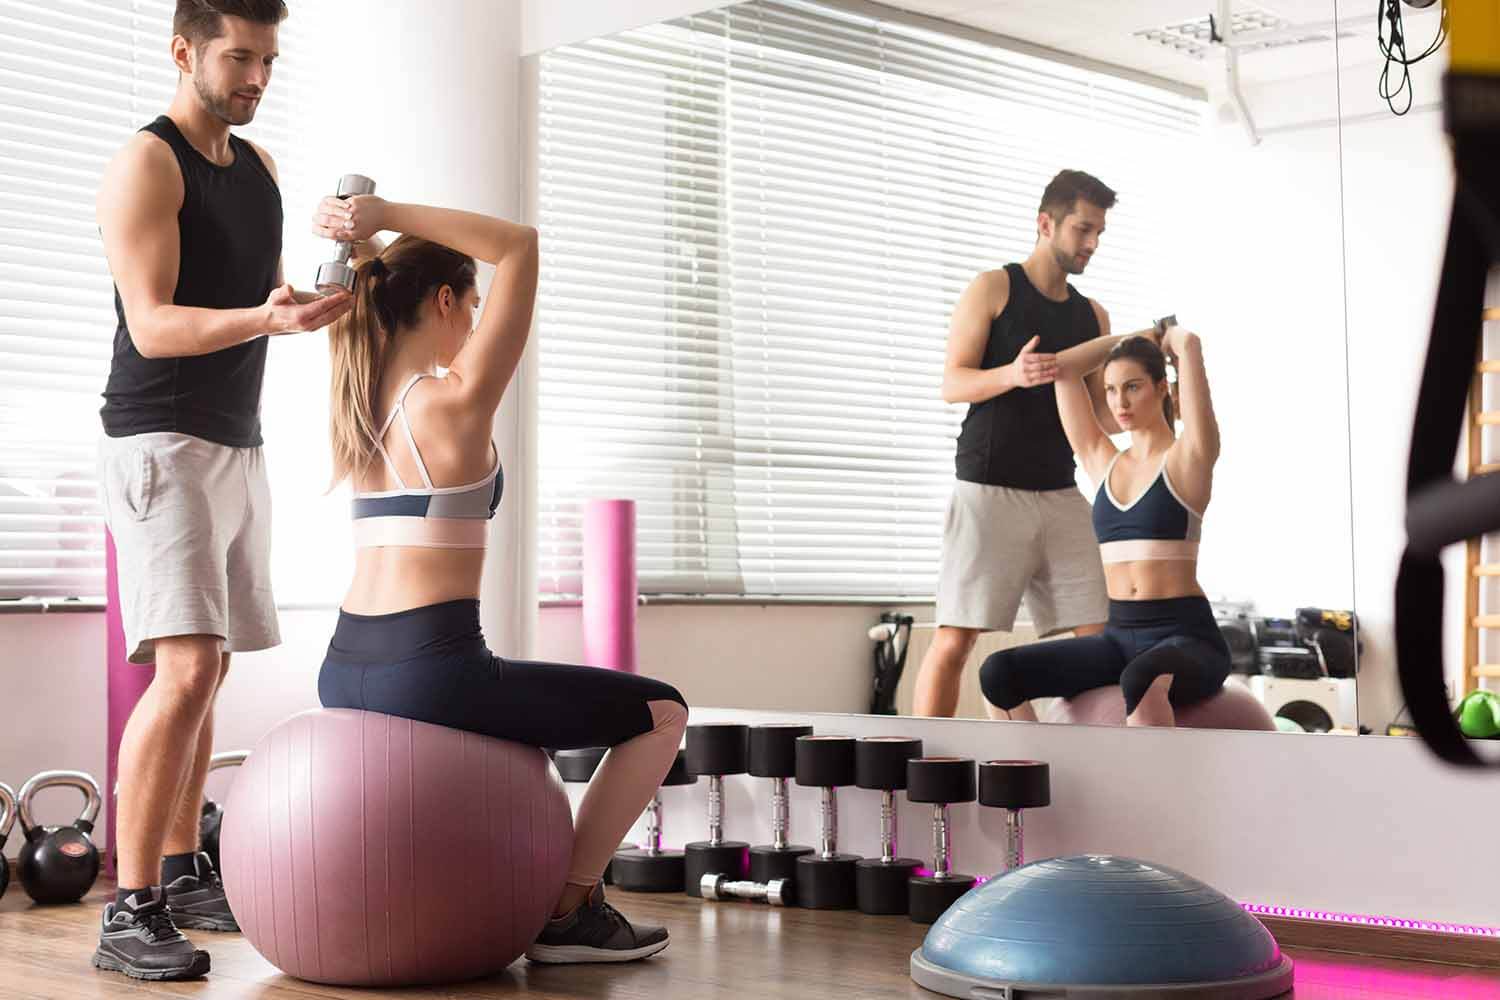 Read more about the article 5 Great Tips to Help You Find Clients as a Personal Trainer